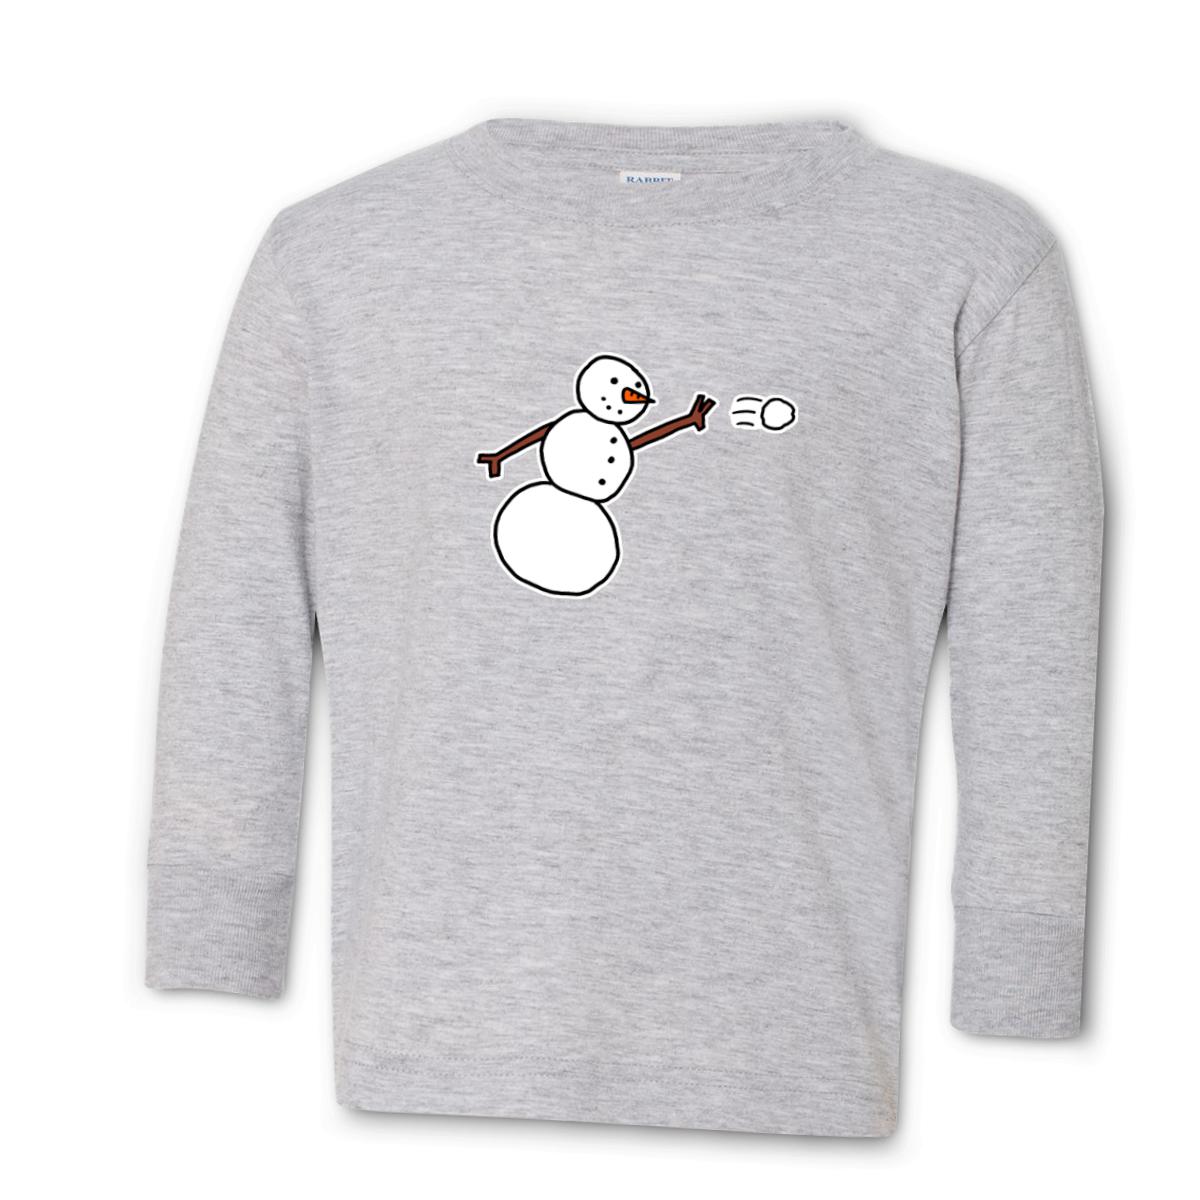 Snowman Throwing Snowball Toddler Long Sleeve Tee 56T heather